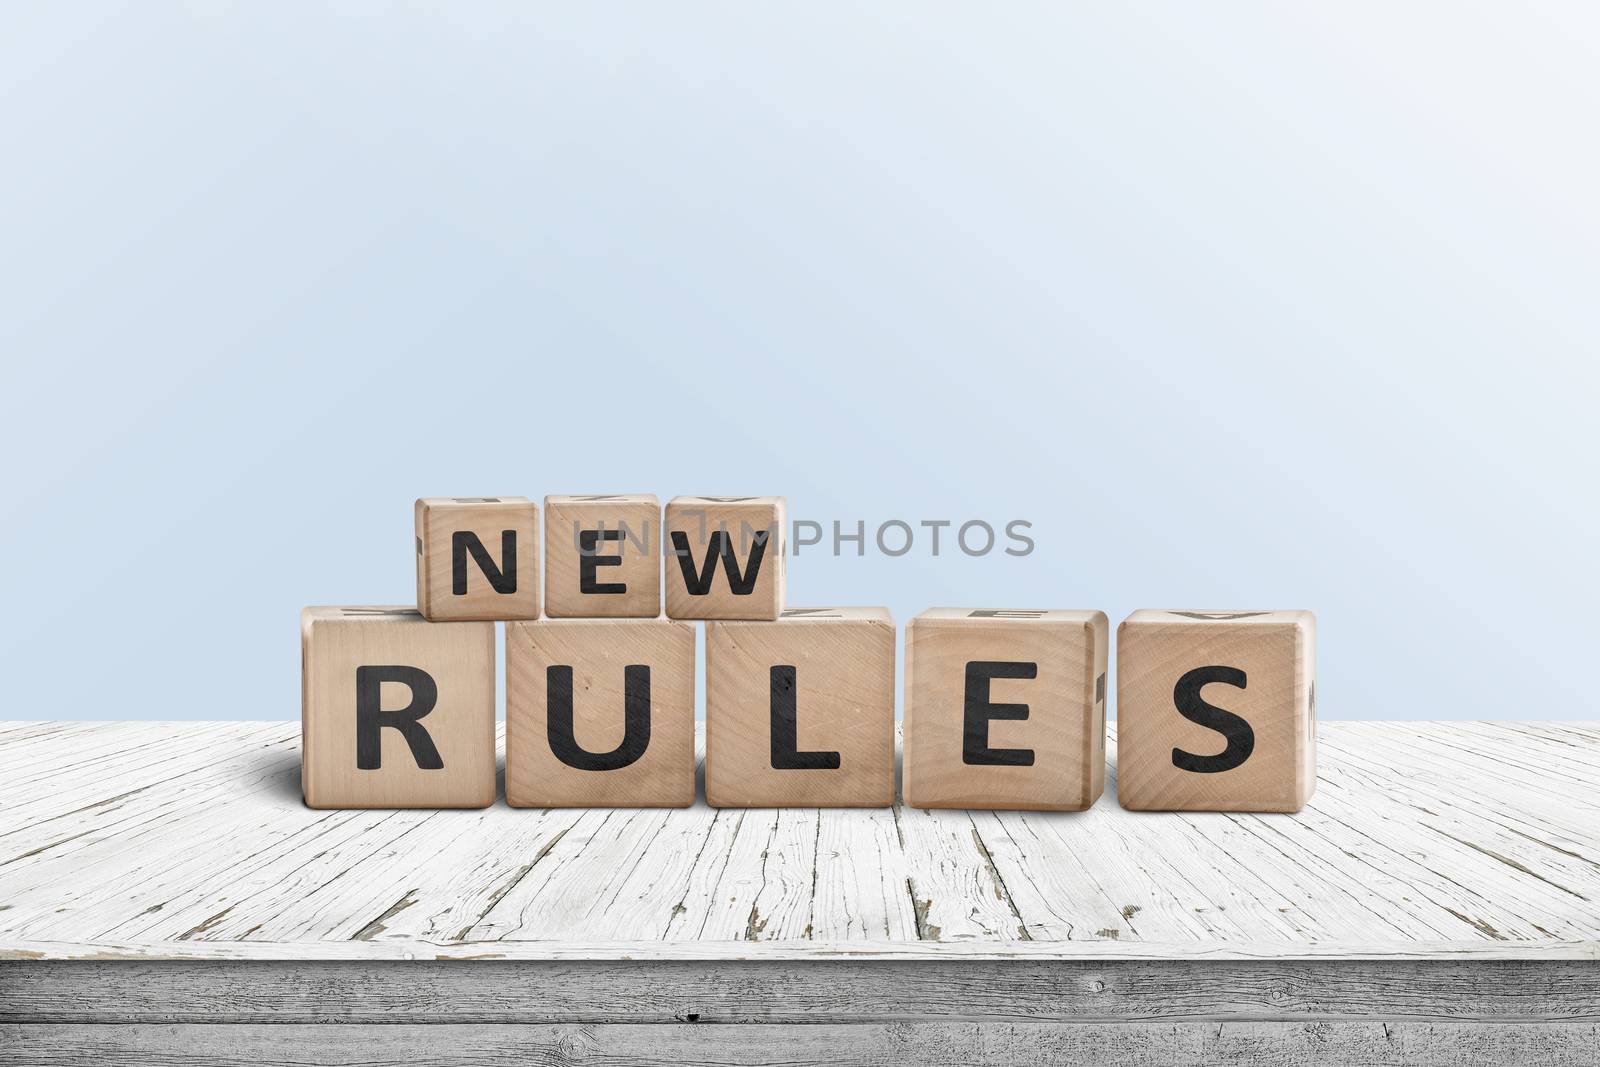 New rules sign made of wood on a desk in a room with a blue background